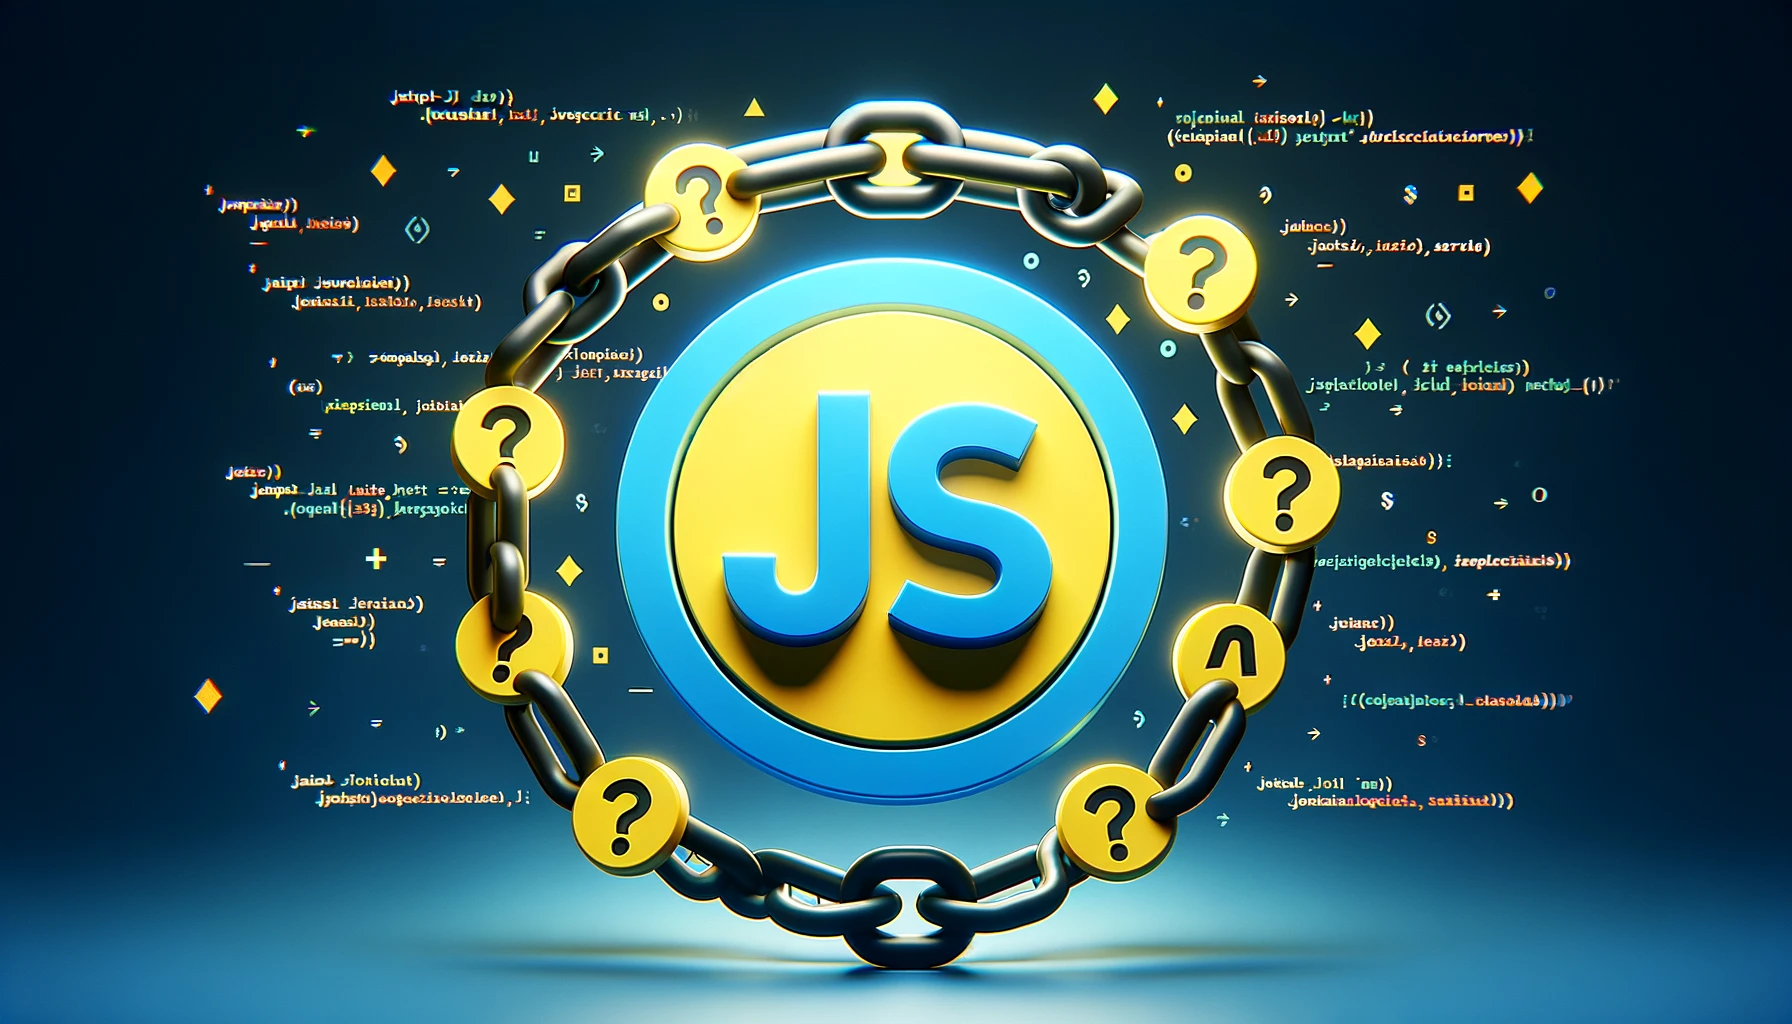 Modern design featuring JavaScript symbols and chain links with question marks, set against a tech-oriented blue and yellow background, illustrating the concept of Optional Chaining in web development.